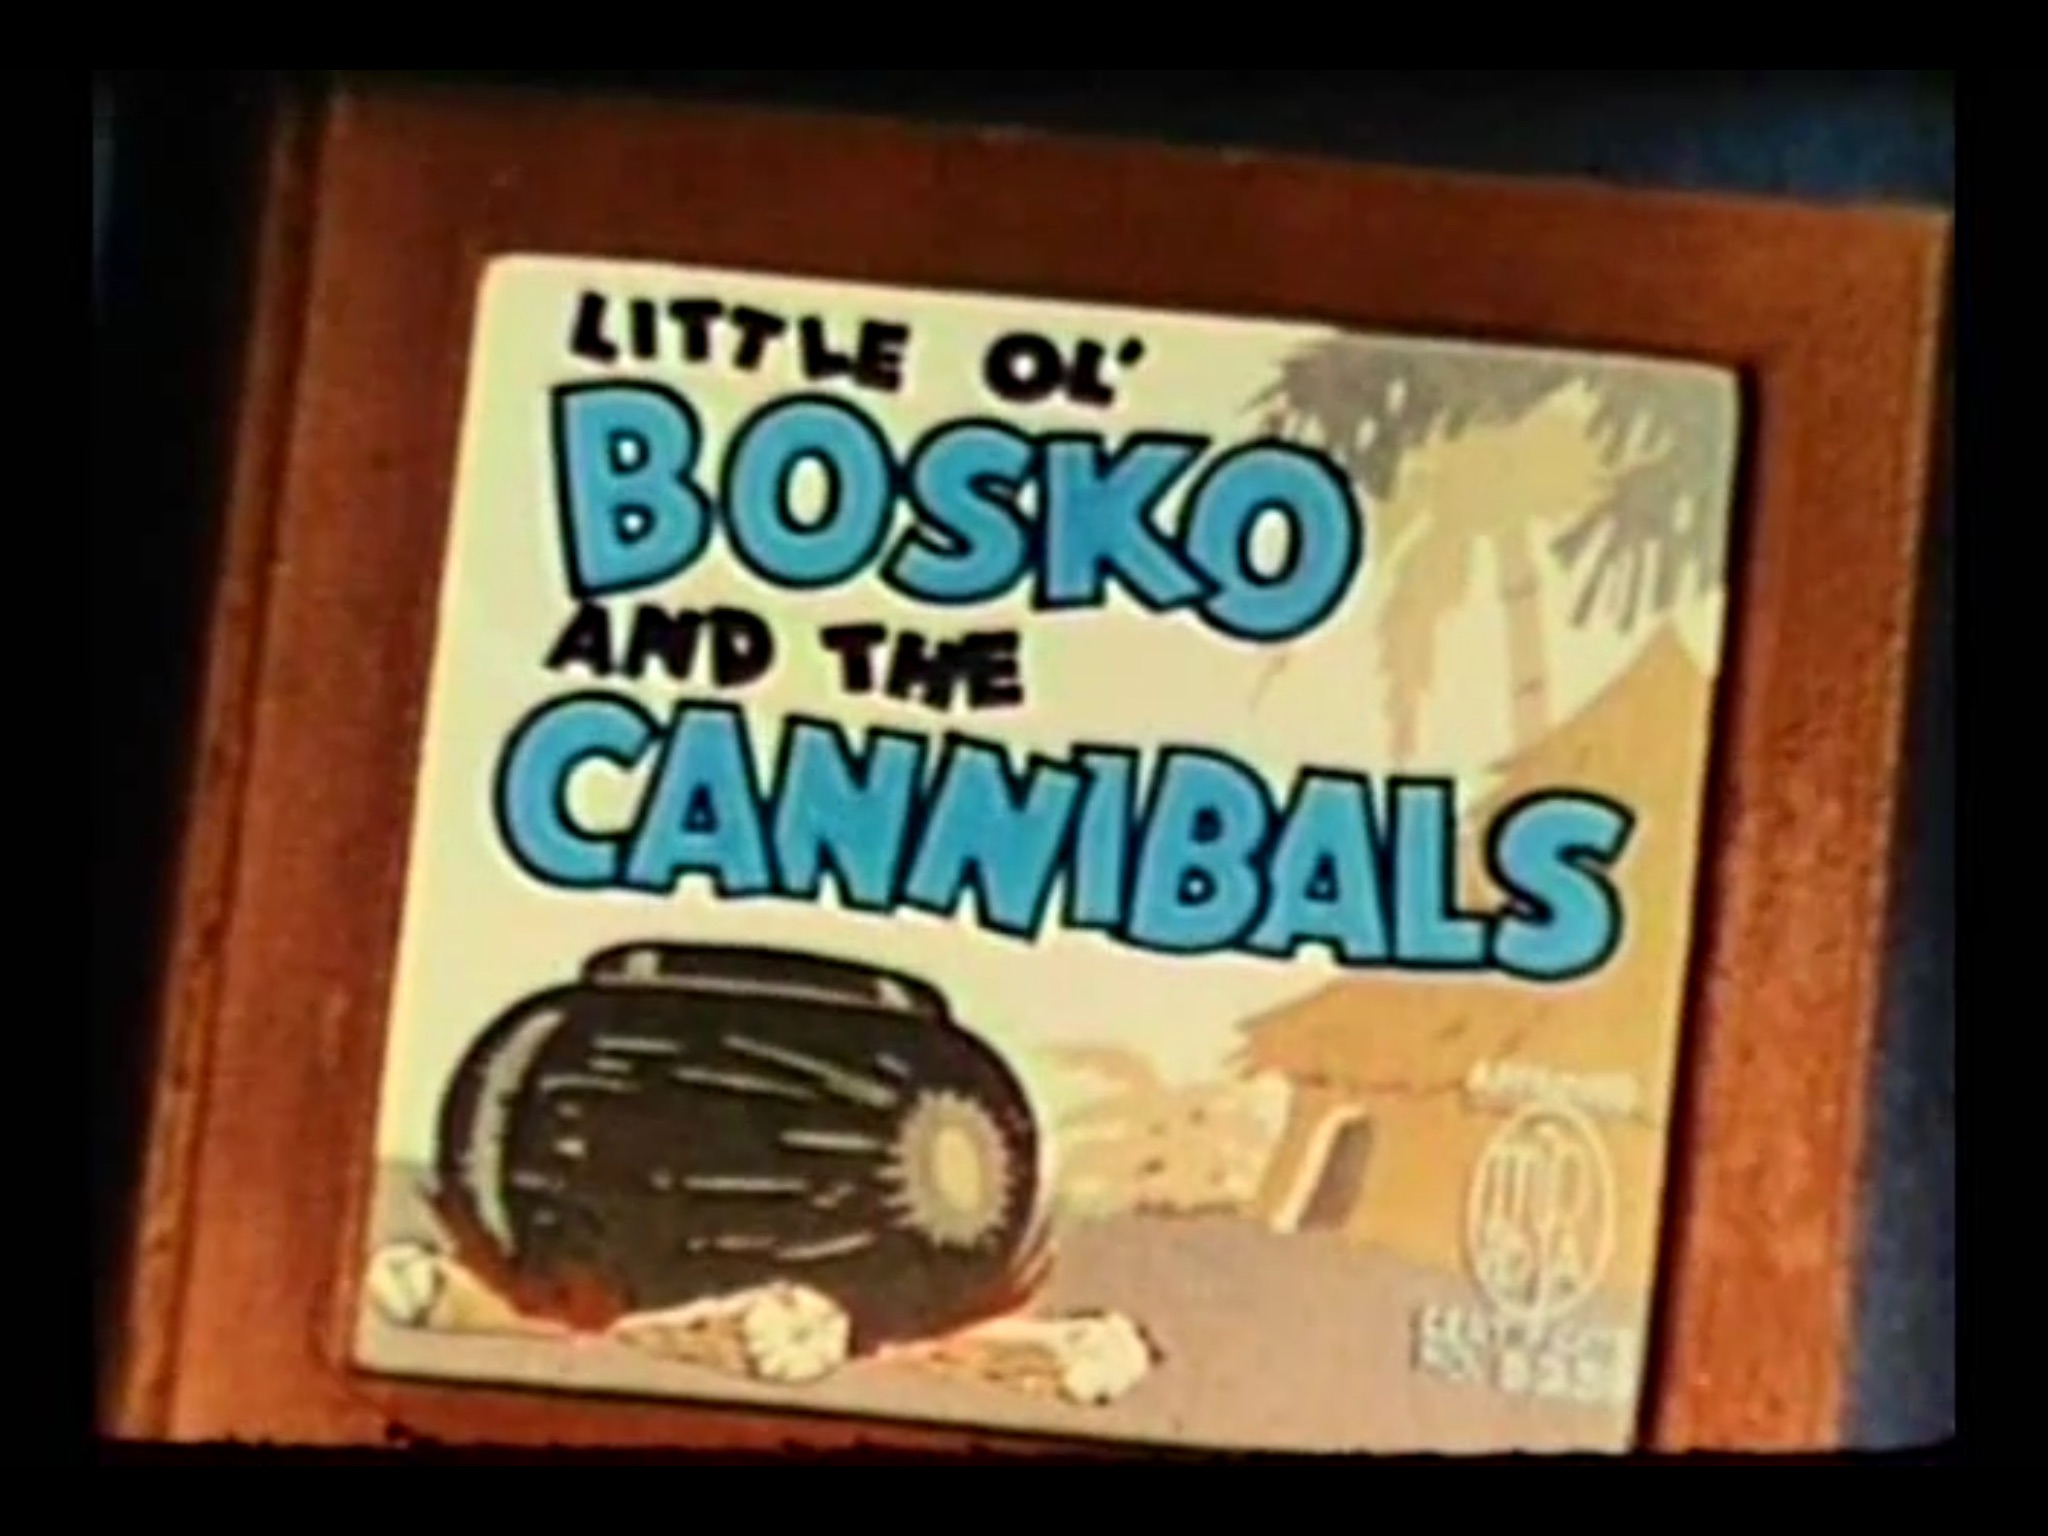 Little Ol Bosko And The Cannibals